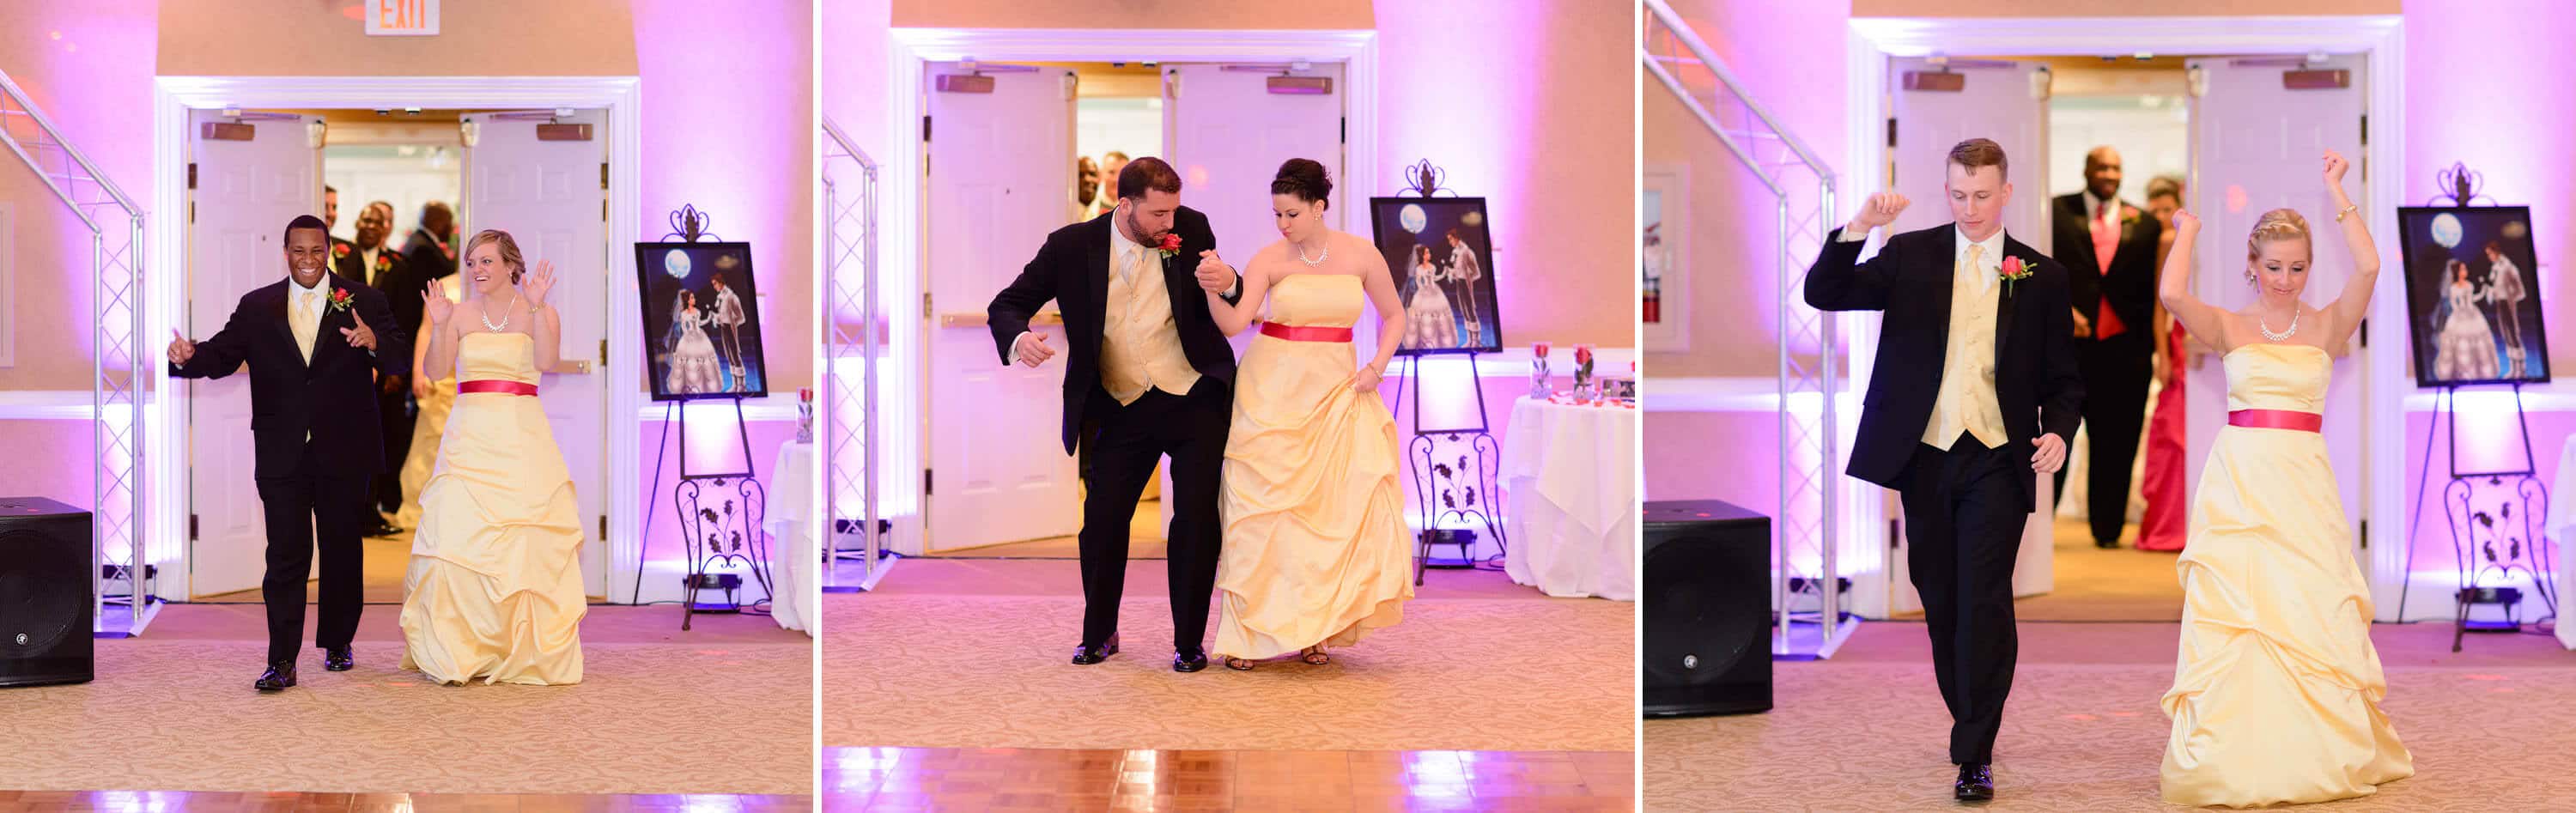 Pawleys Plantation wedding with a Beauty and the Beast theme reception3000 x 947